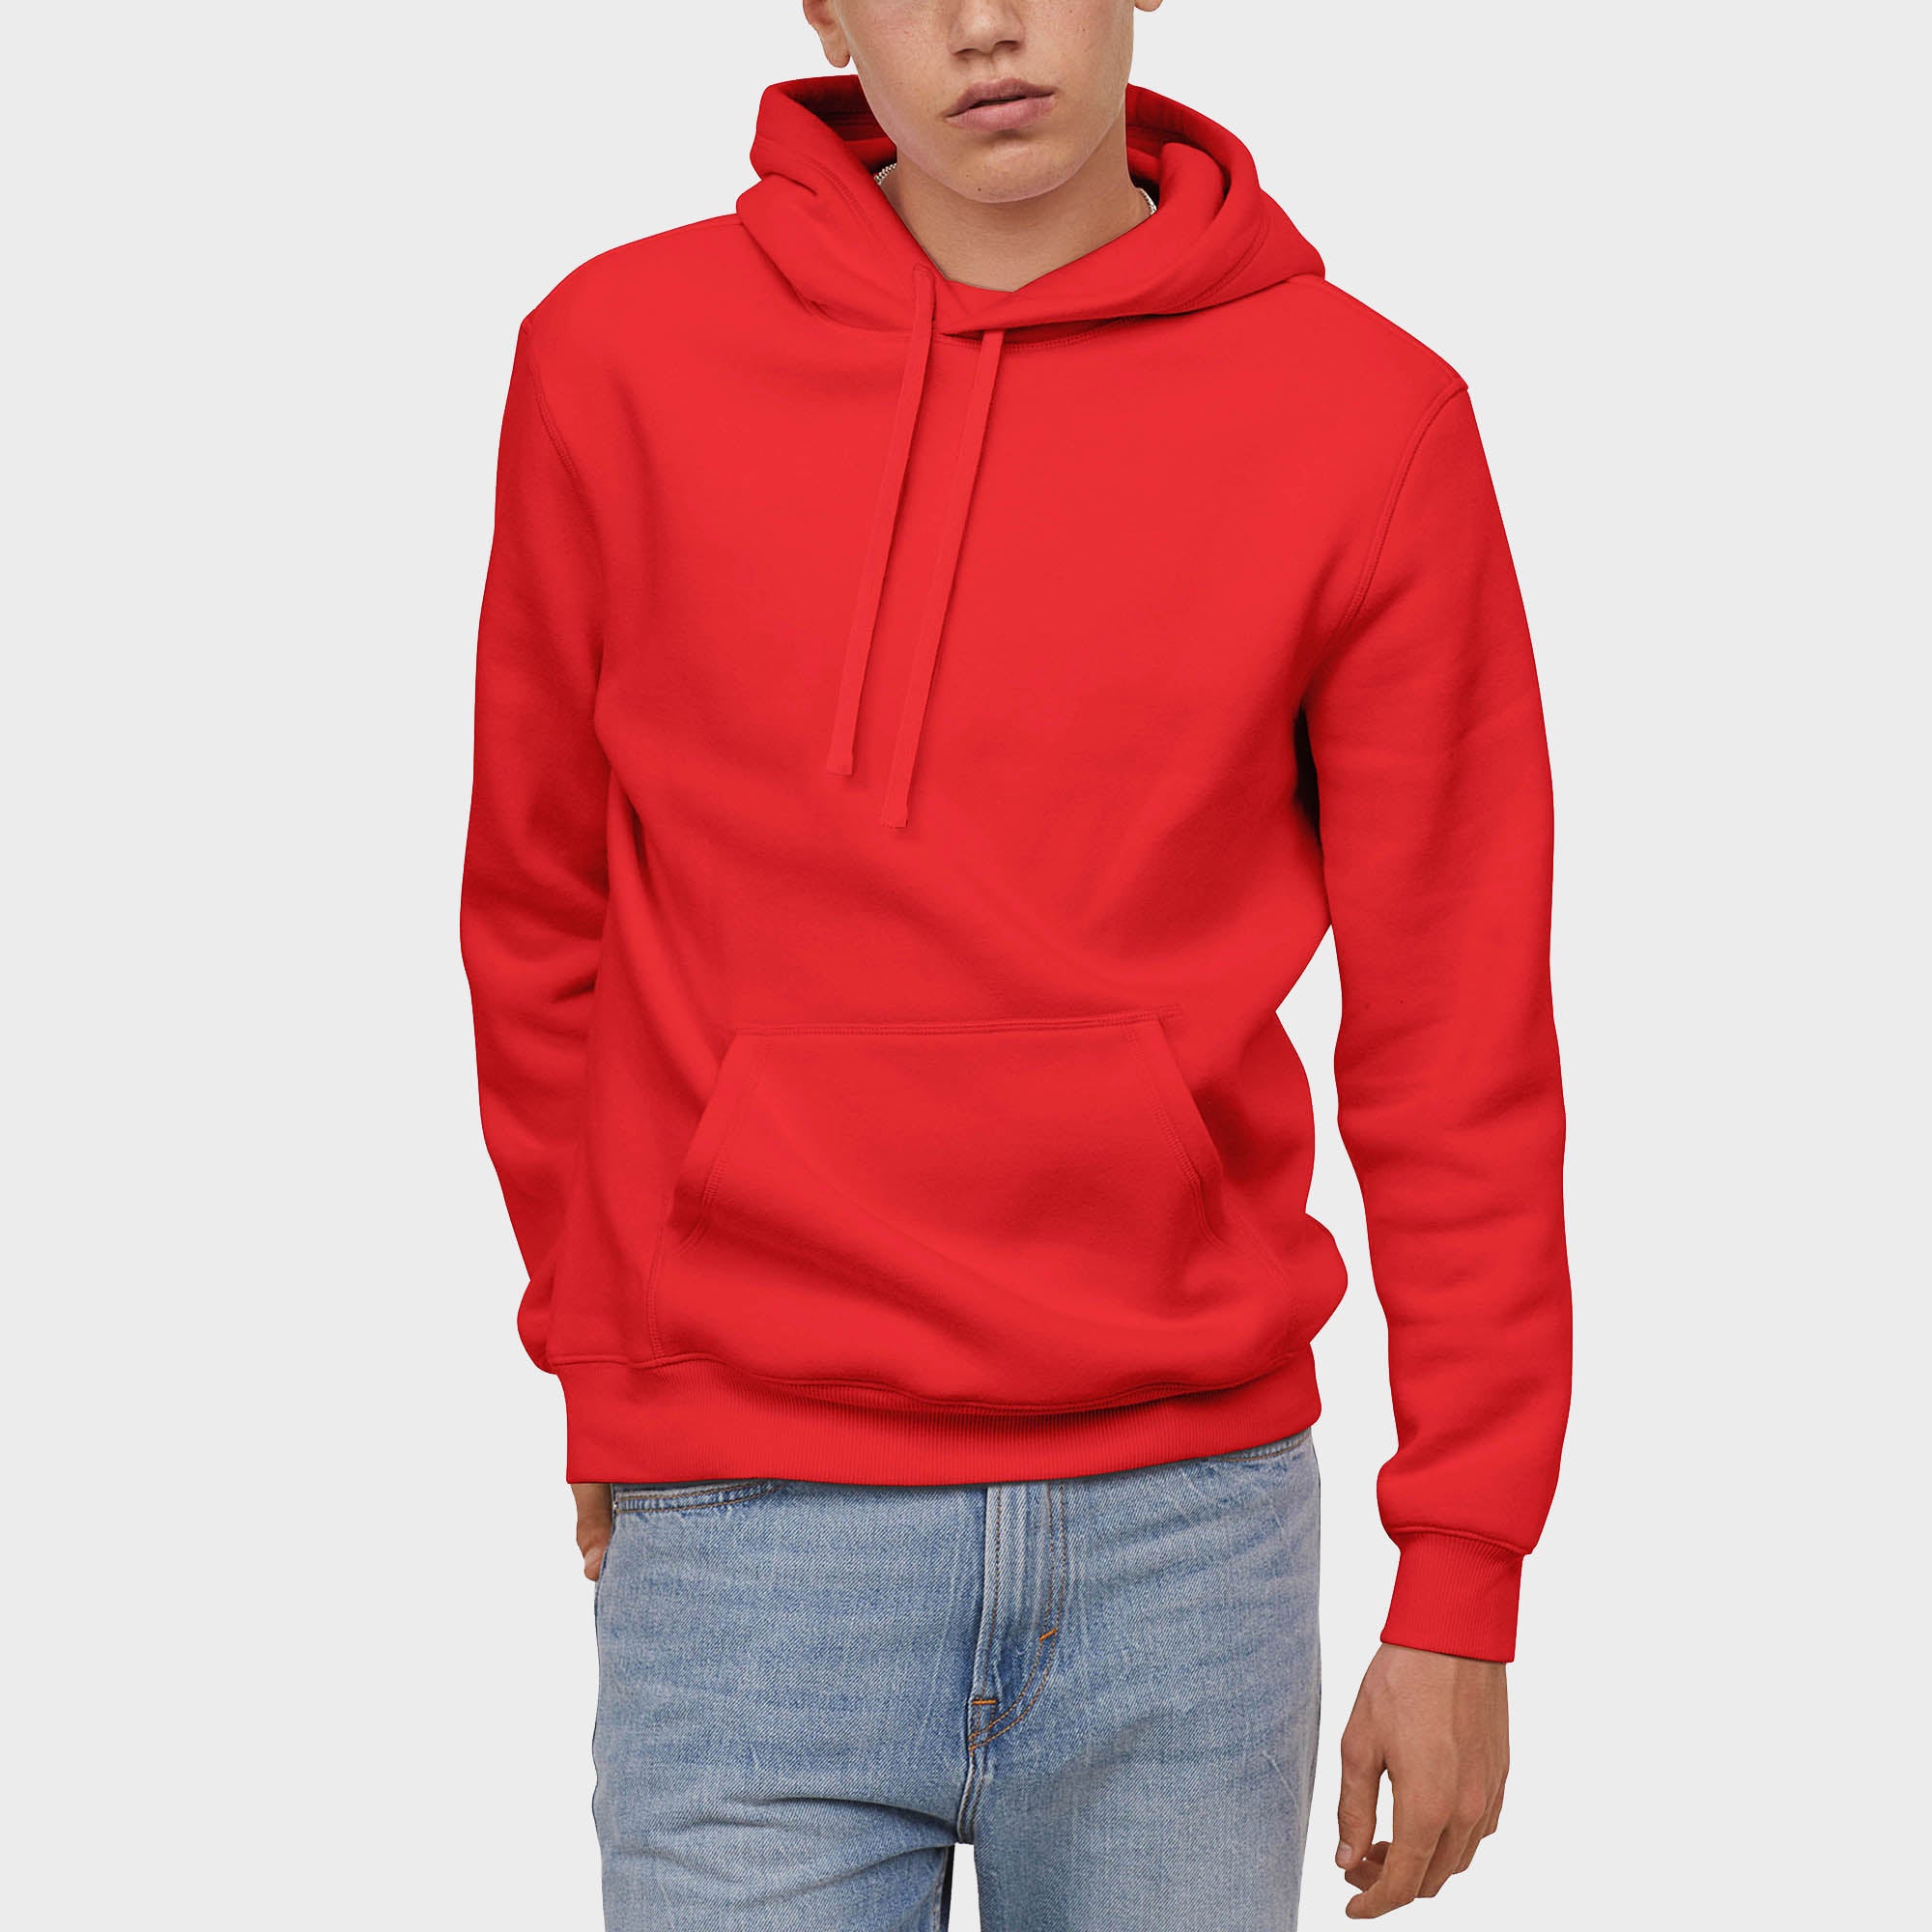 pullover hoodie_mens pullover hoodie_pullover sweatshirt_champion pullover hoodie_hooded pullover_heavyweight pullover hoodie_Red